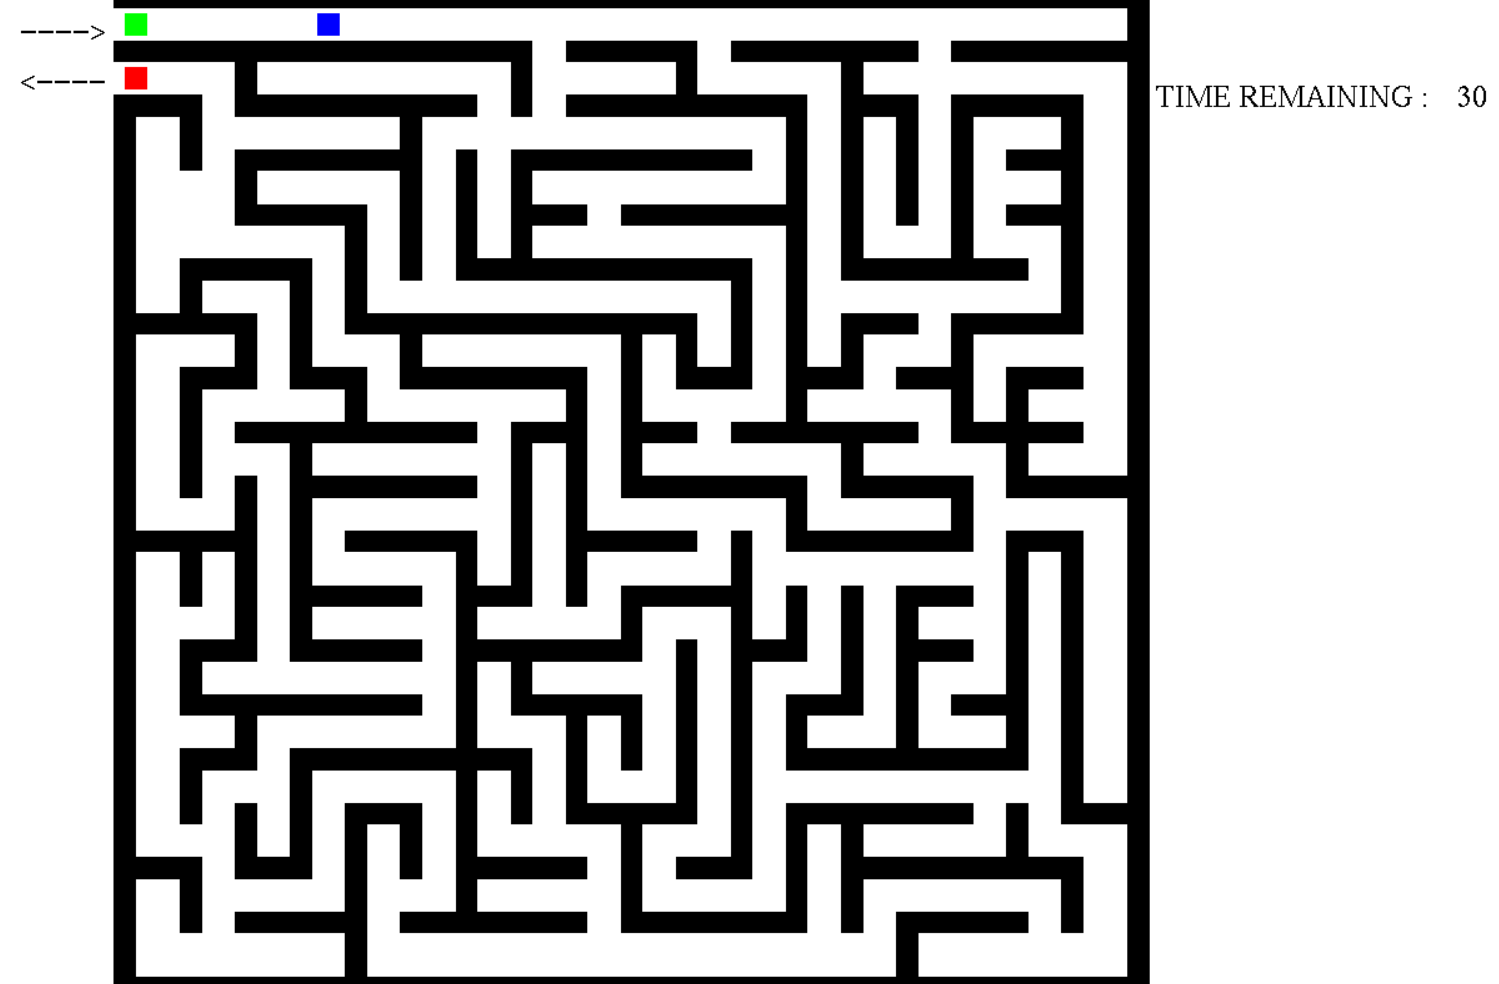 Screenshot of the Path Finding (Maze) Game